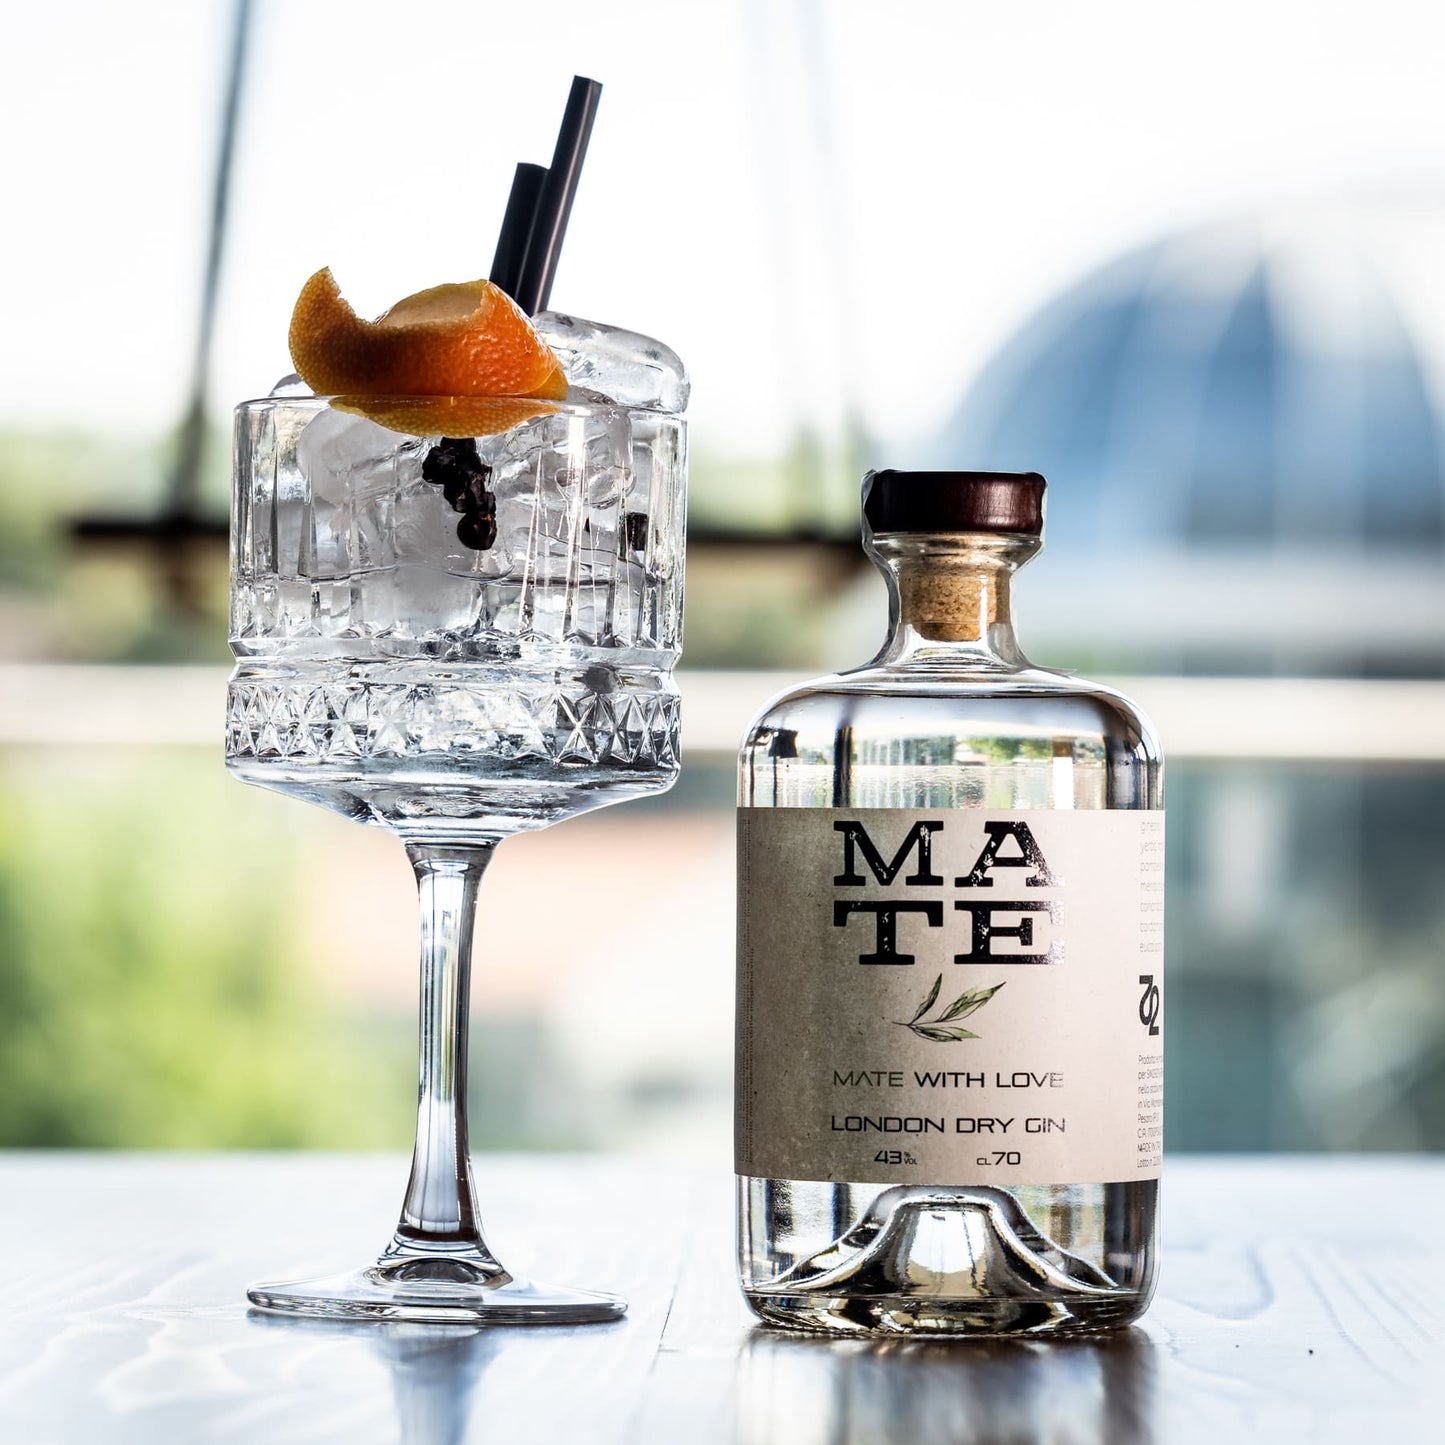 MATE LONDON DRY GIN - MATE WITH LOVE